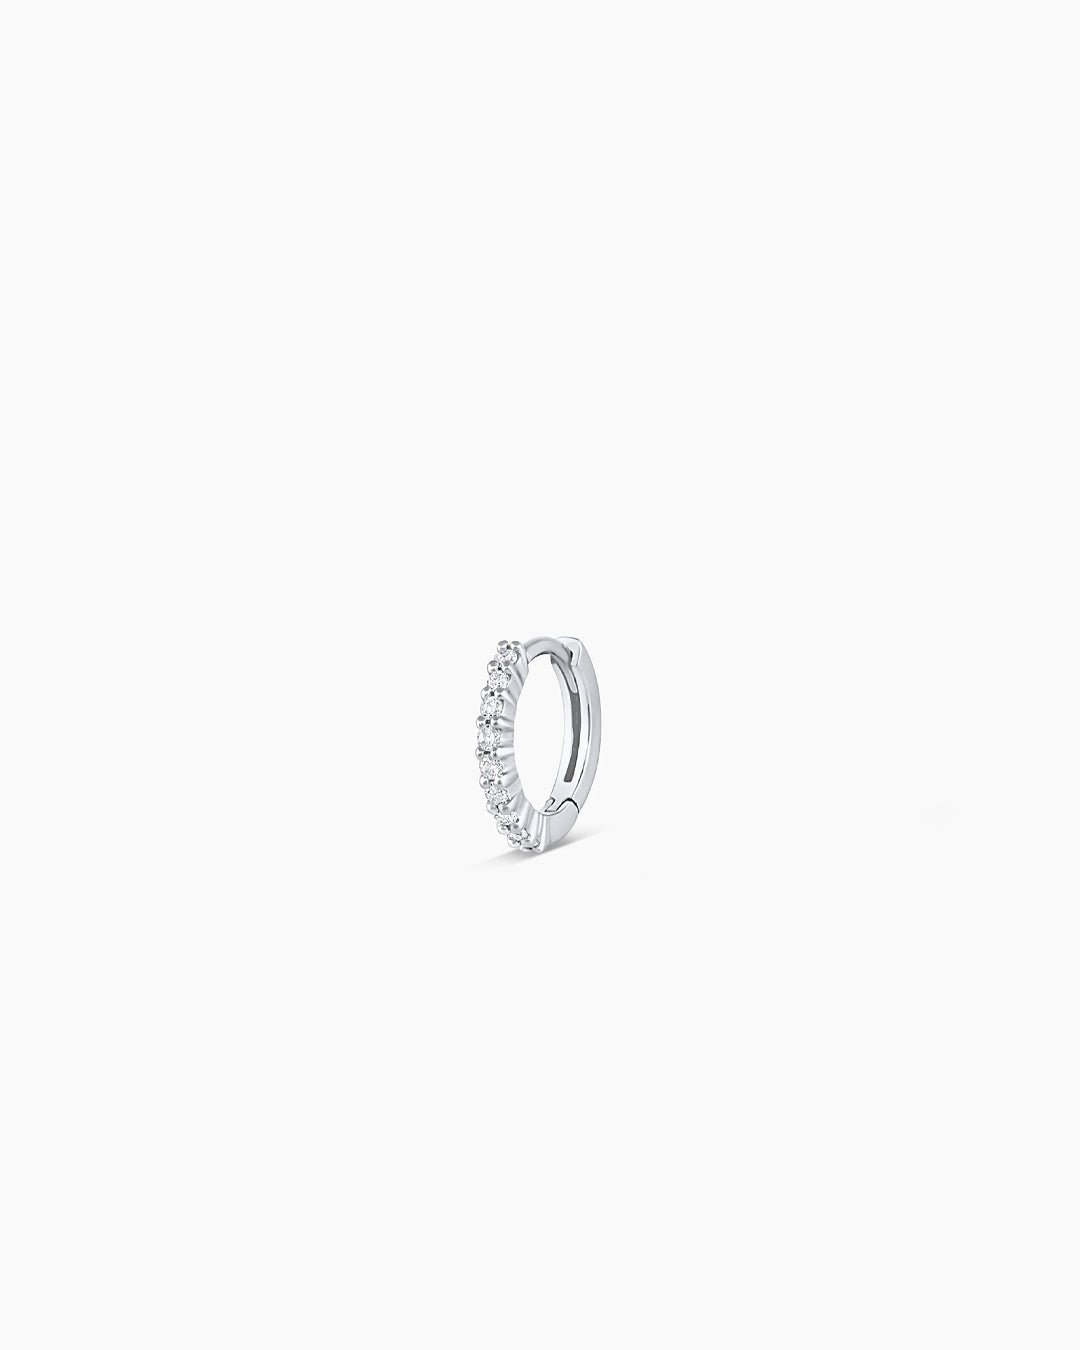 Woman wearing Classic Gold Huggie || option::14k Solid White Gold, 9mm, Single